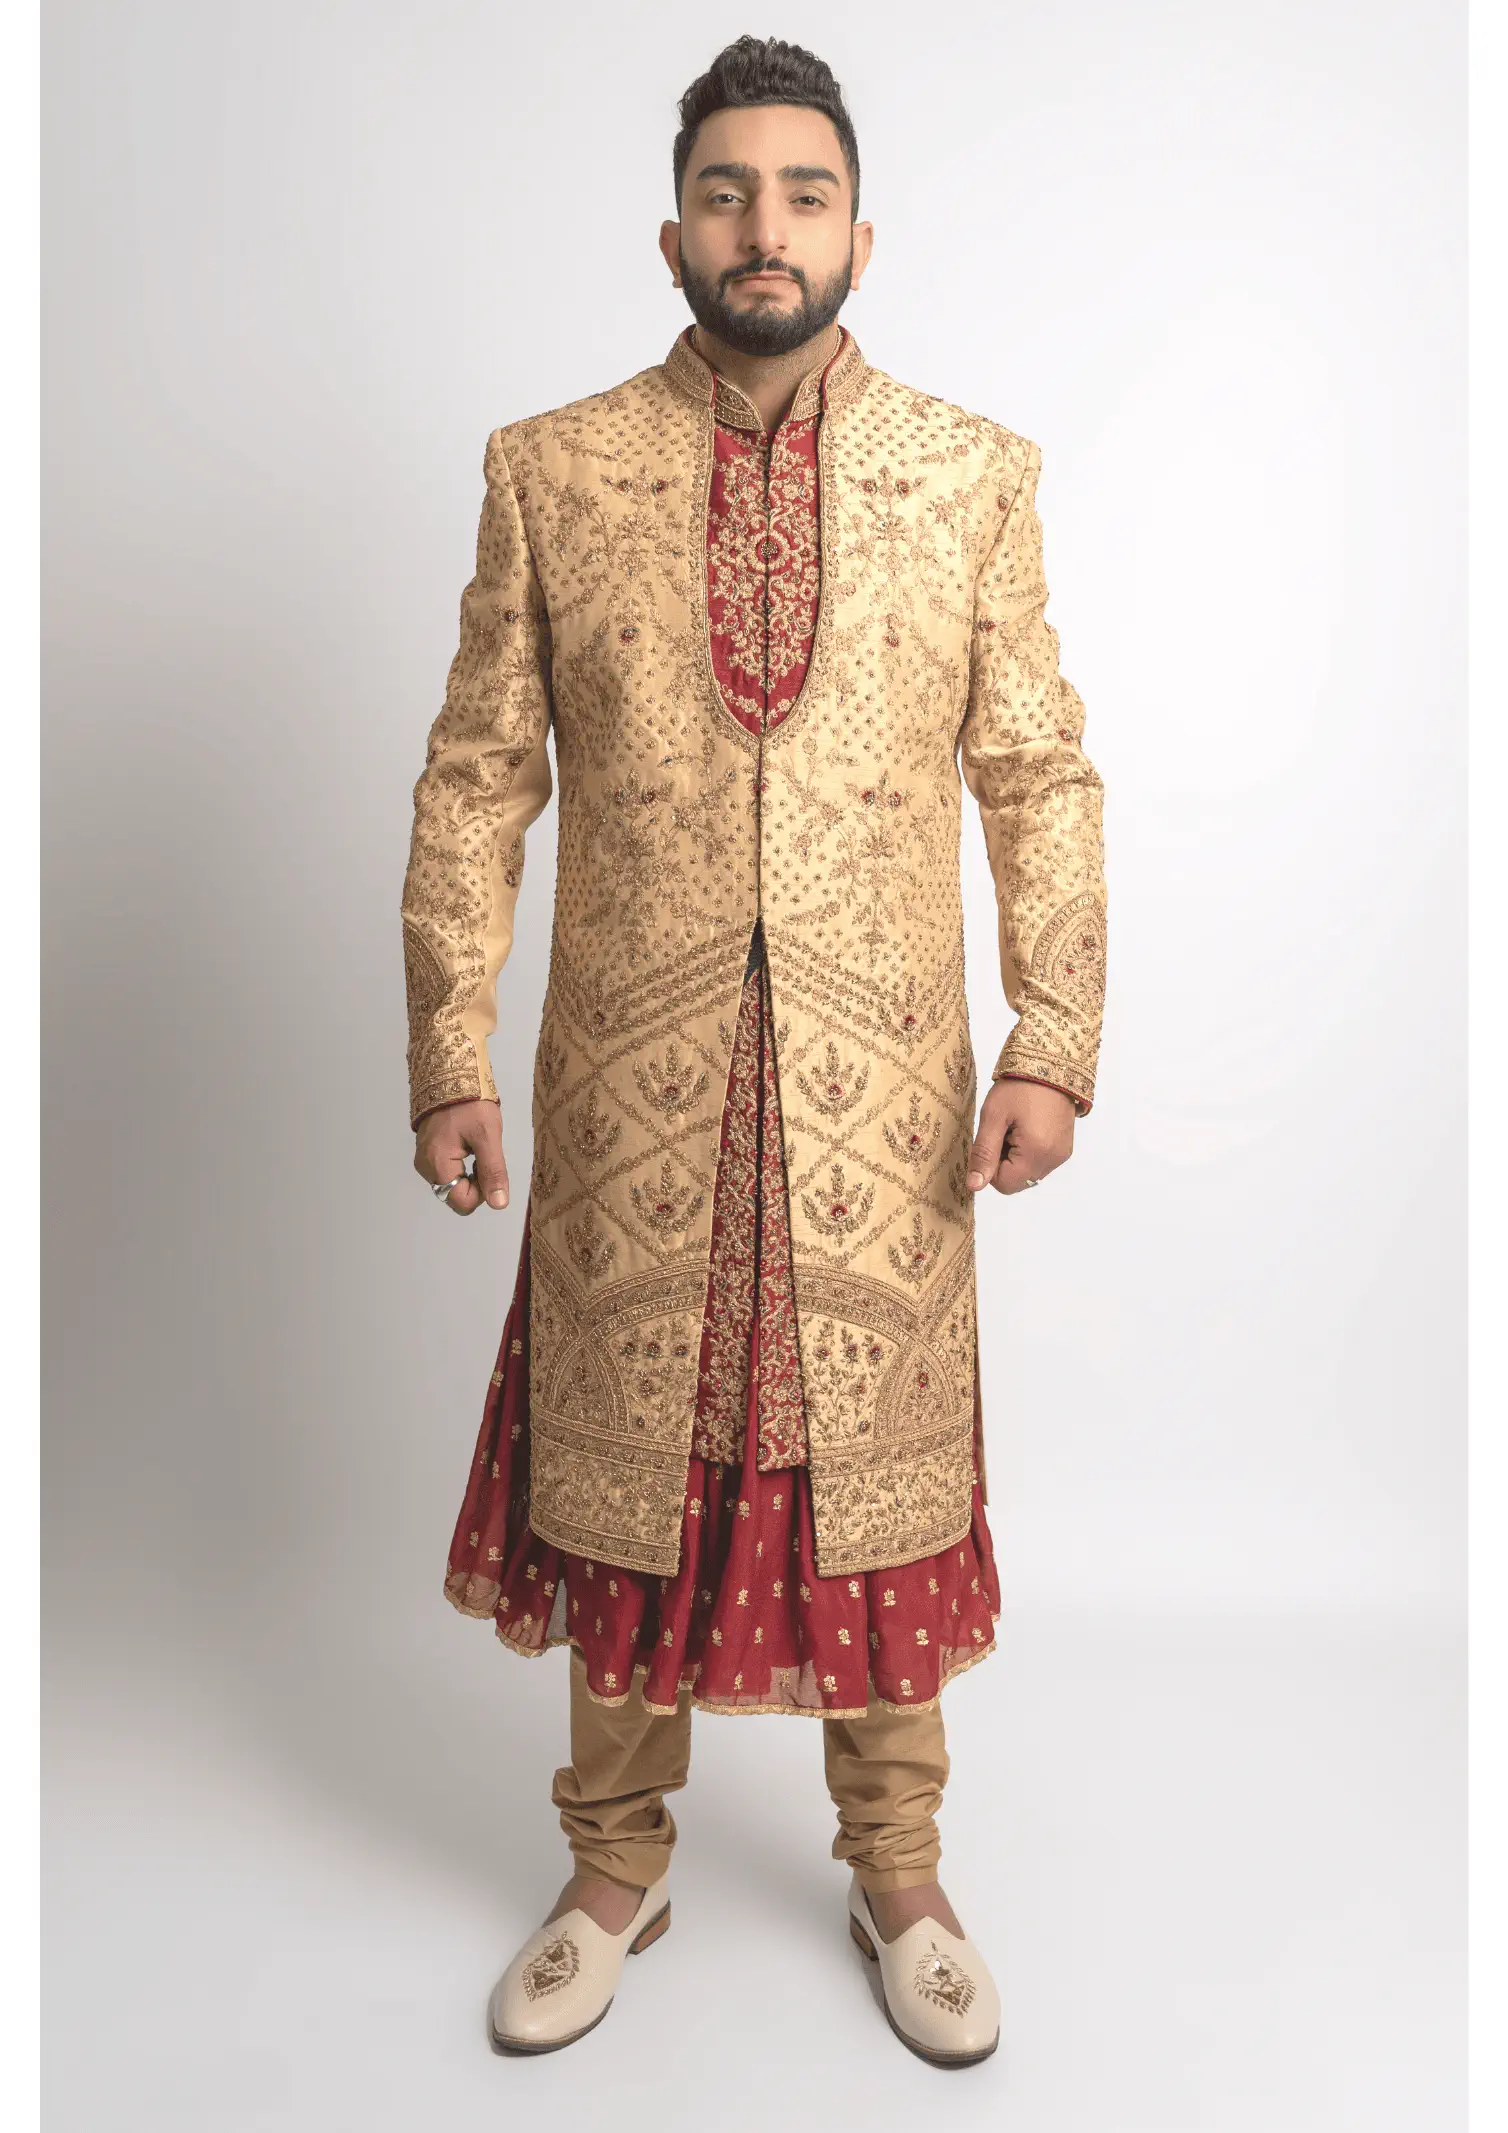 Gold and Red Anarkali Sherwani - Indian Groom Outfit